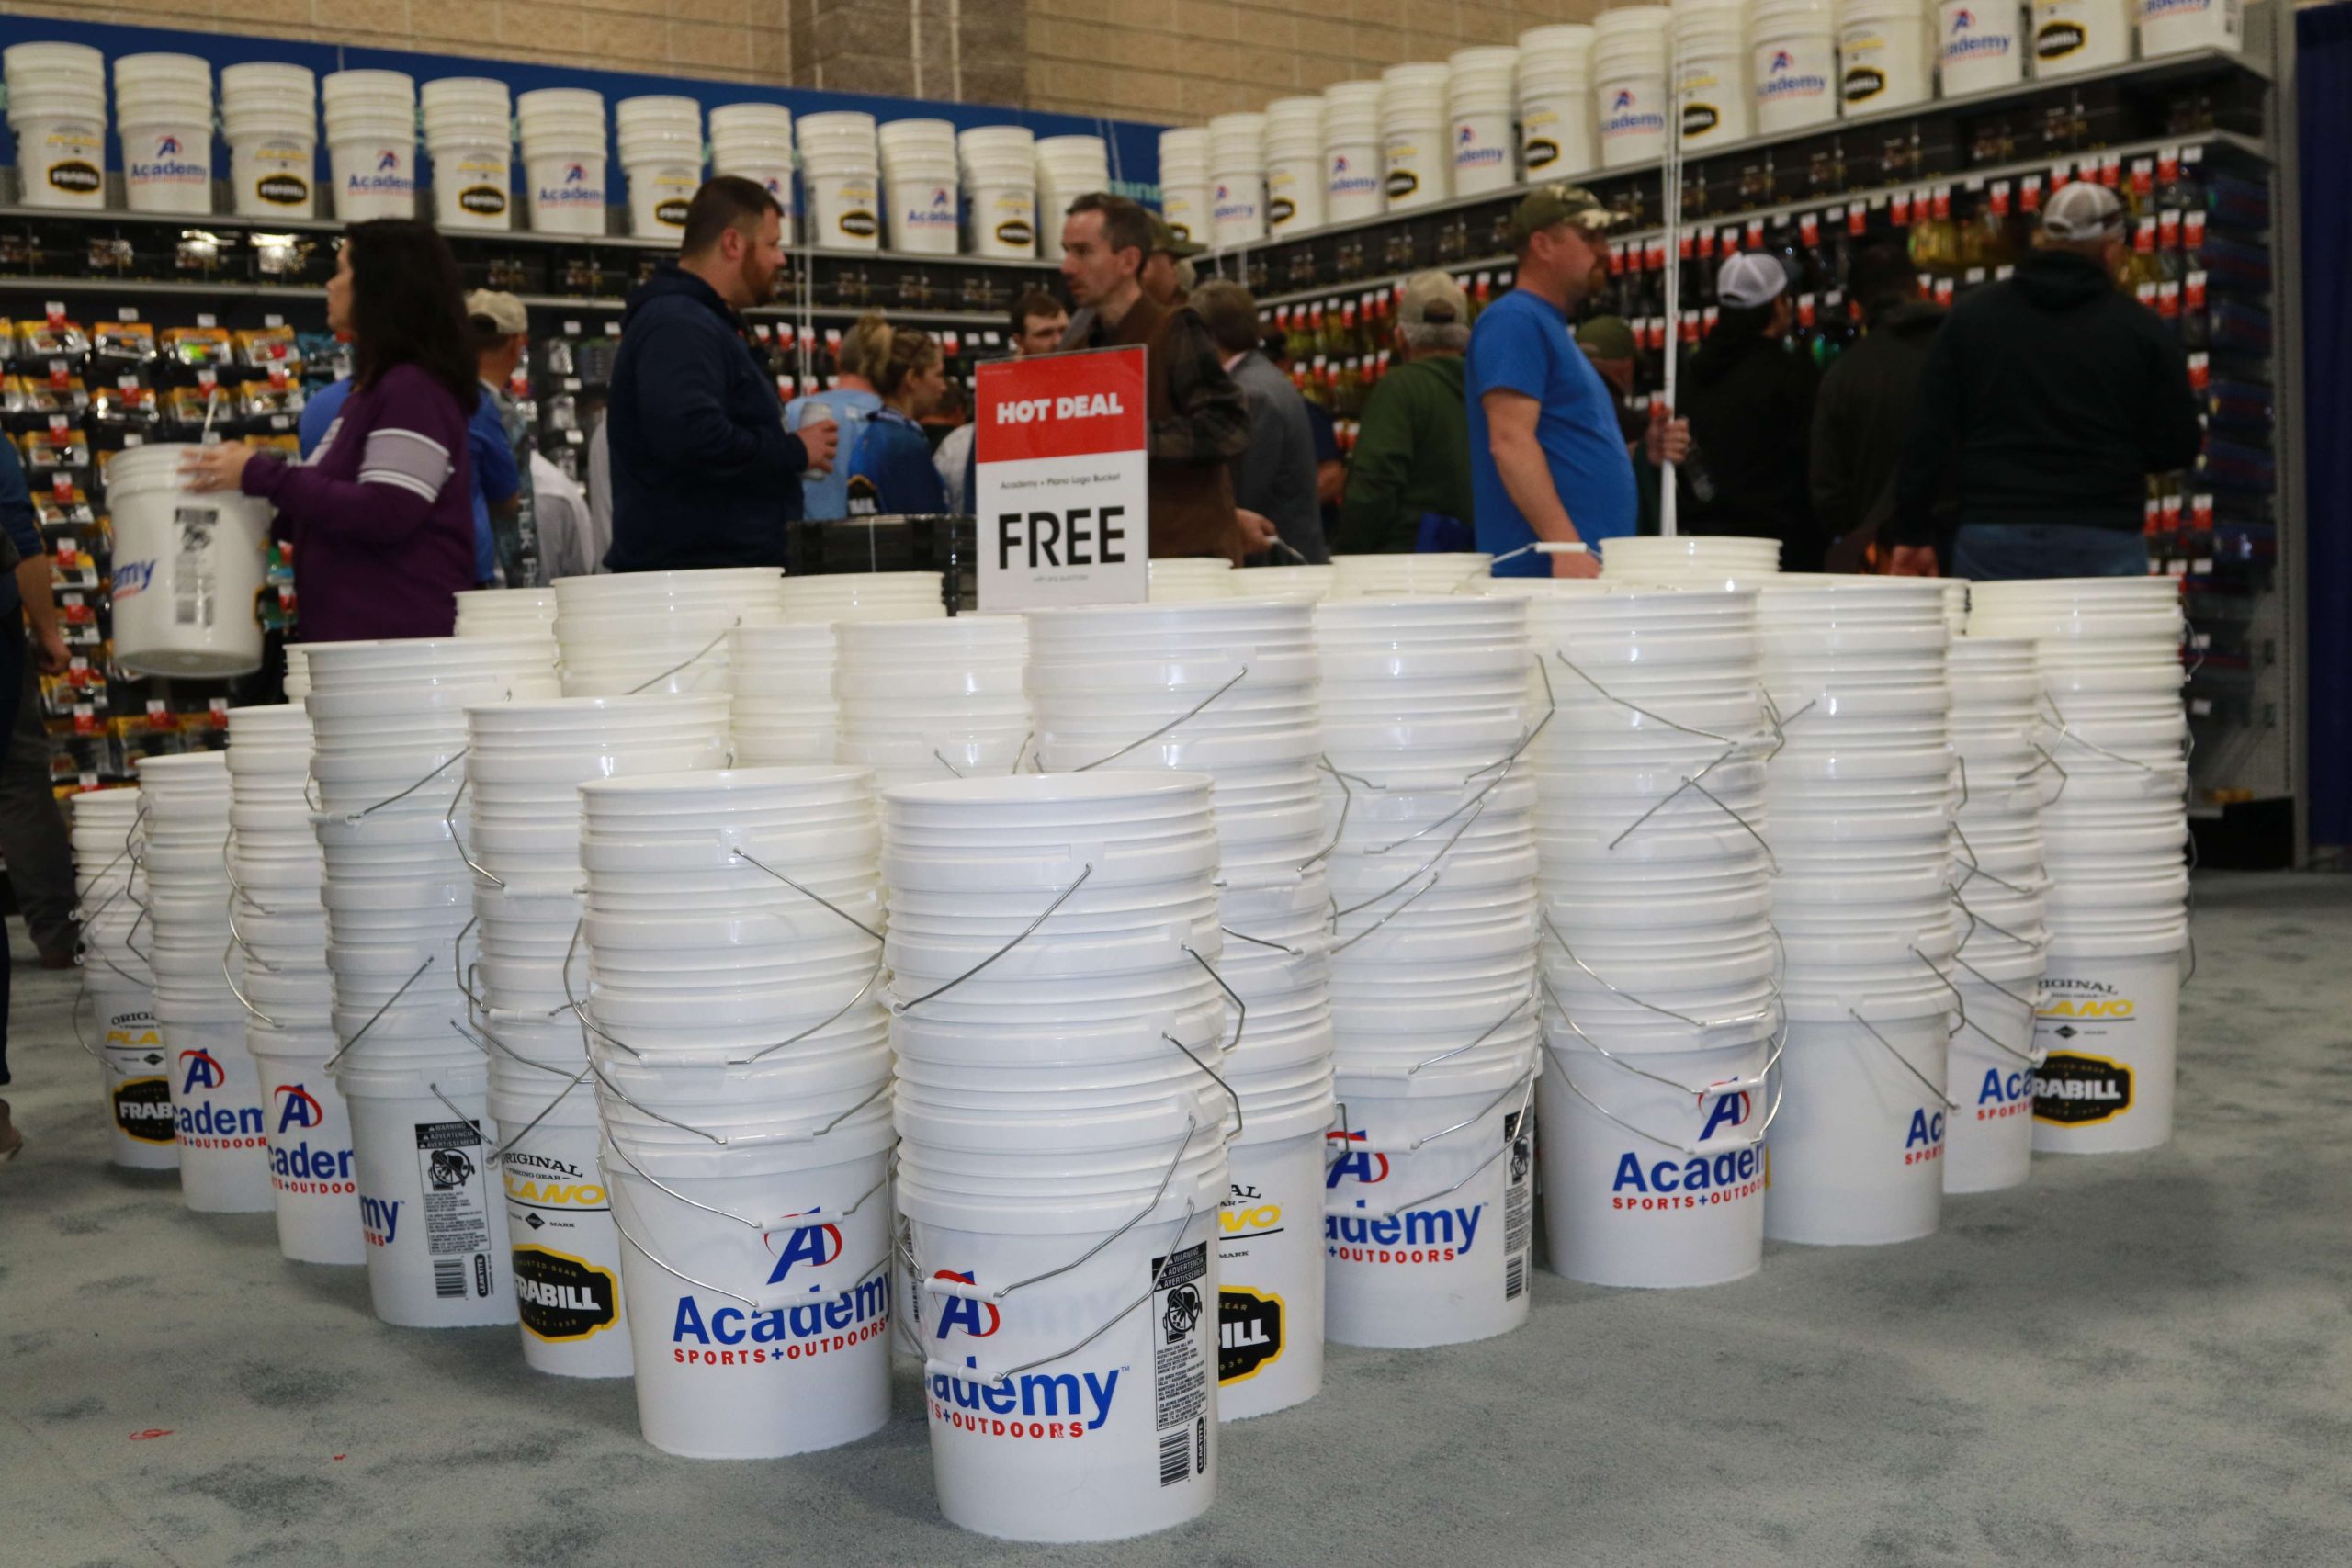 Academy provided free branded buckets for customers to carry their Expo purchases.